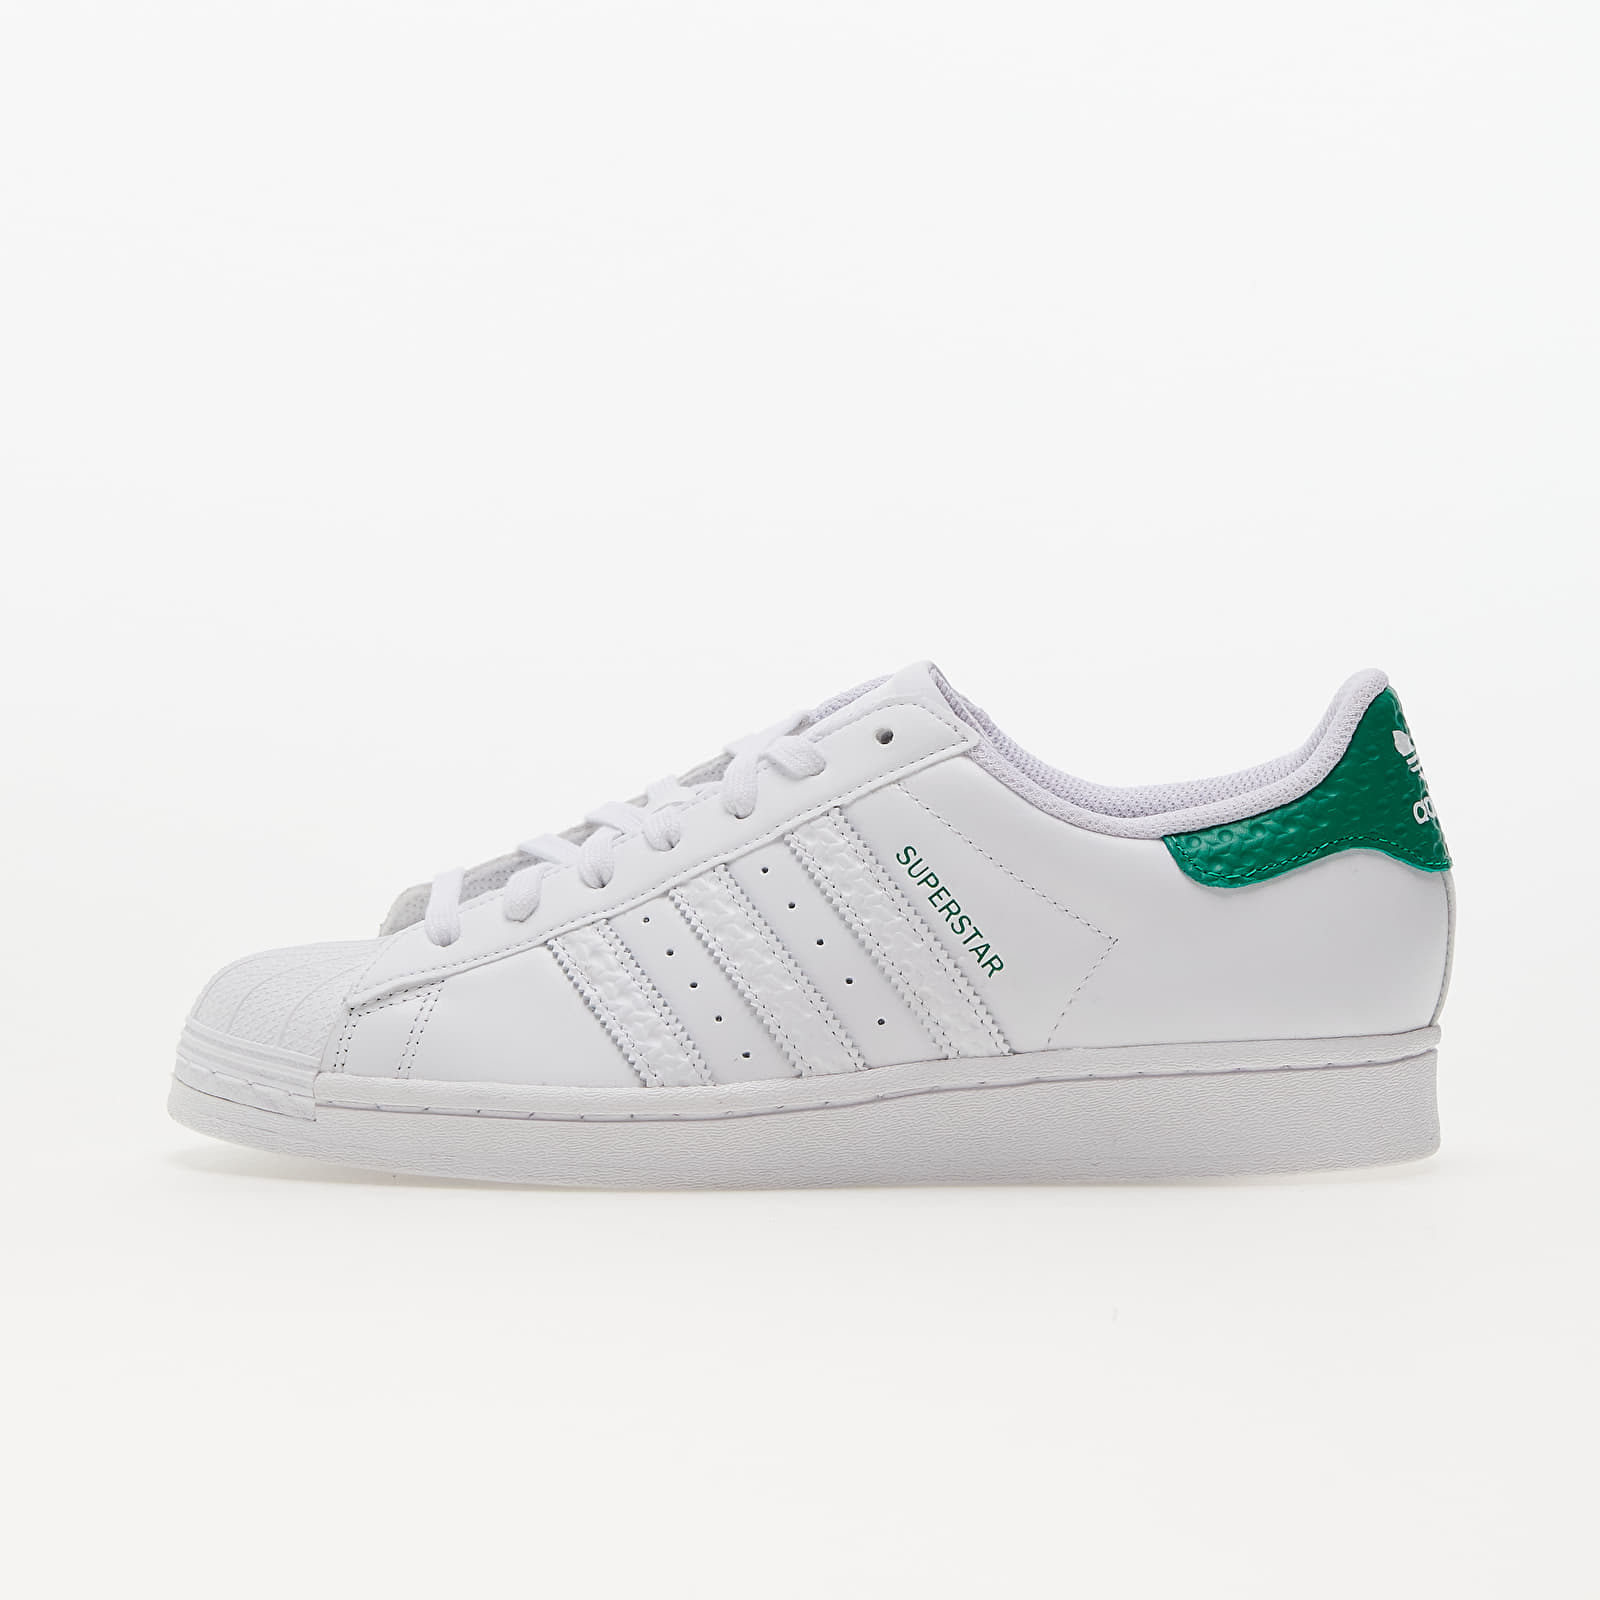 Women's shoes adidas Superstar W Ftw White/ Ftw White/ Green